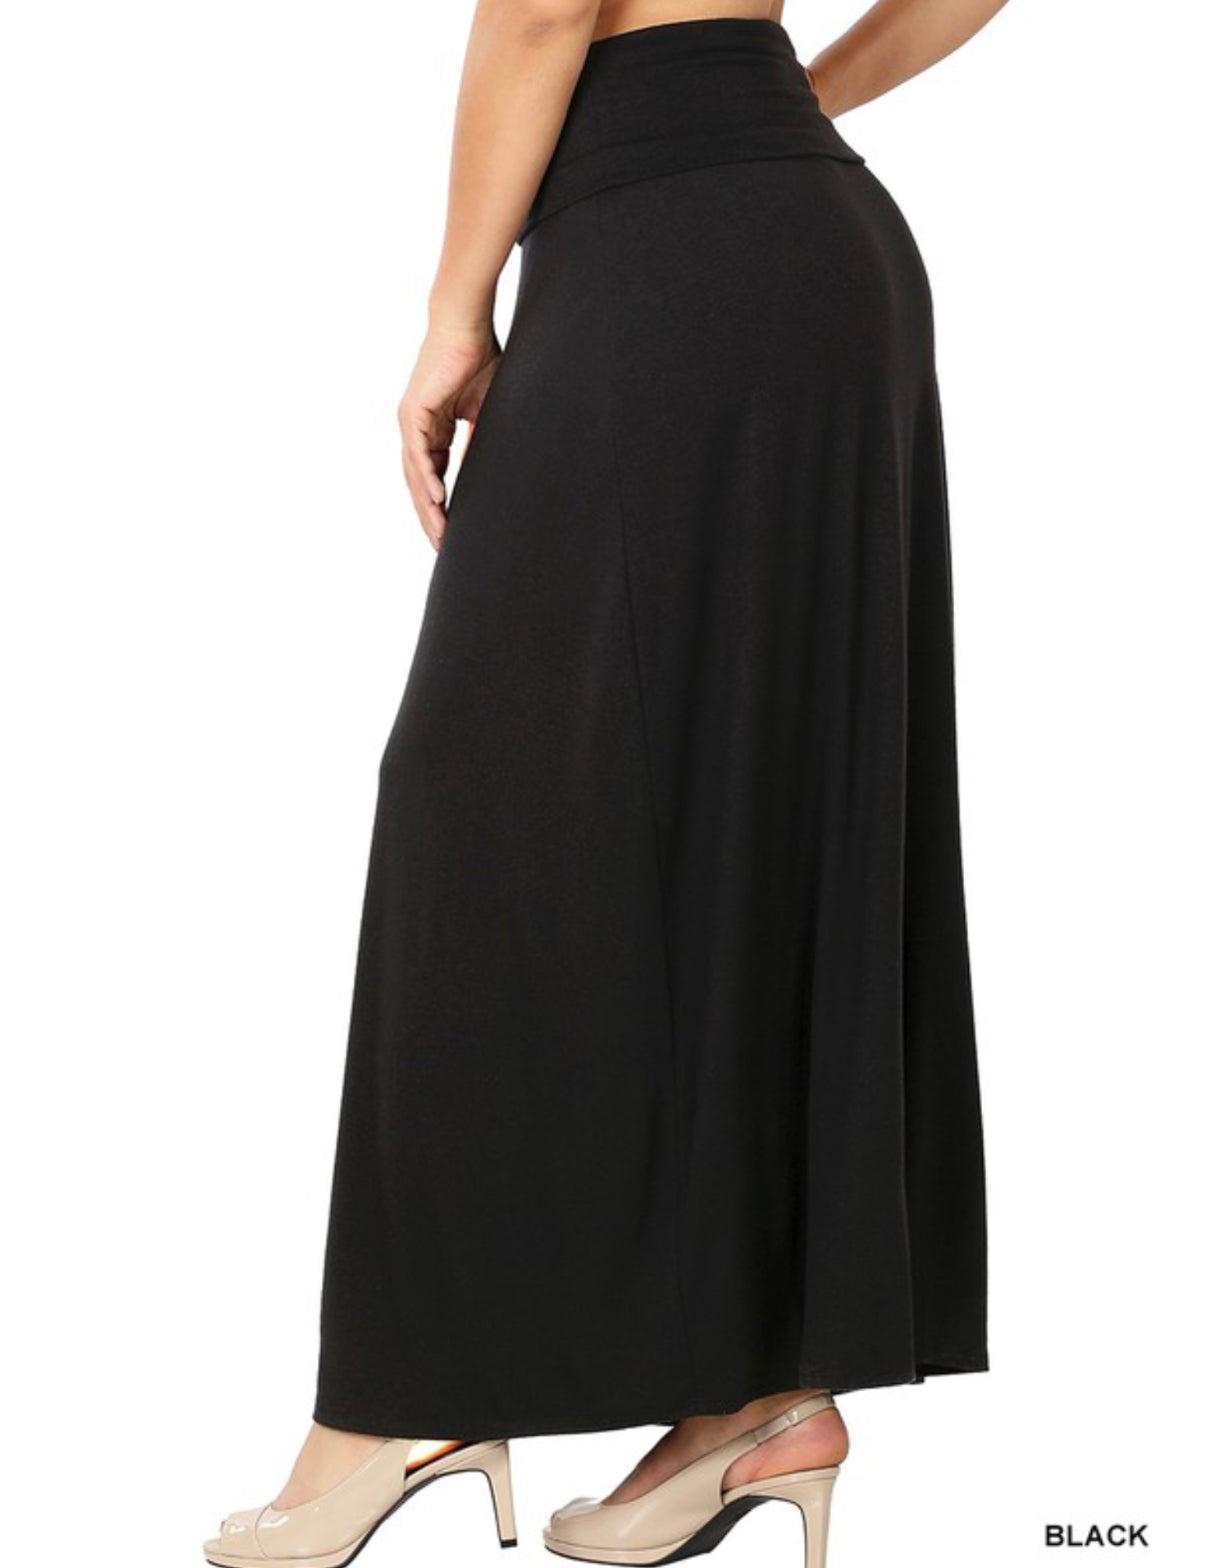 Black Relaxed Fit Maxi Skirt